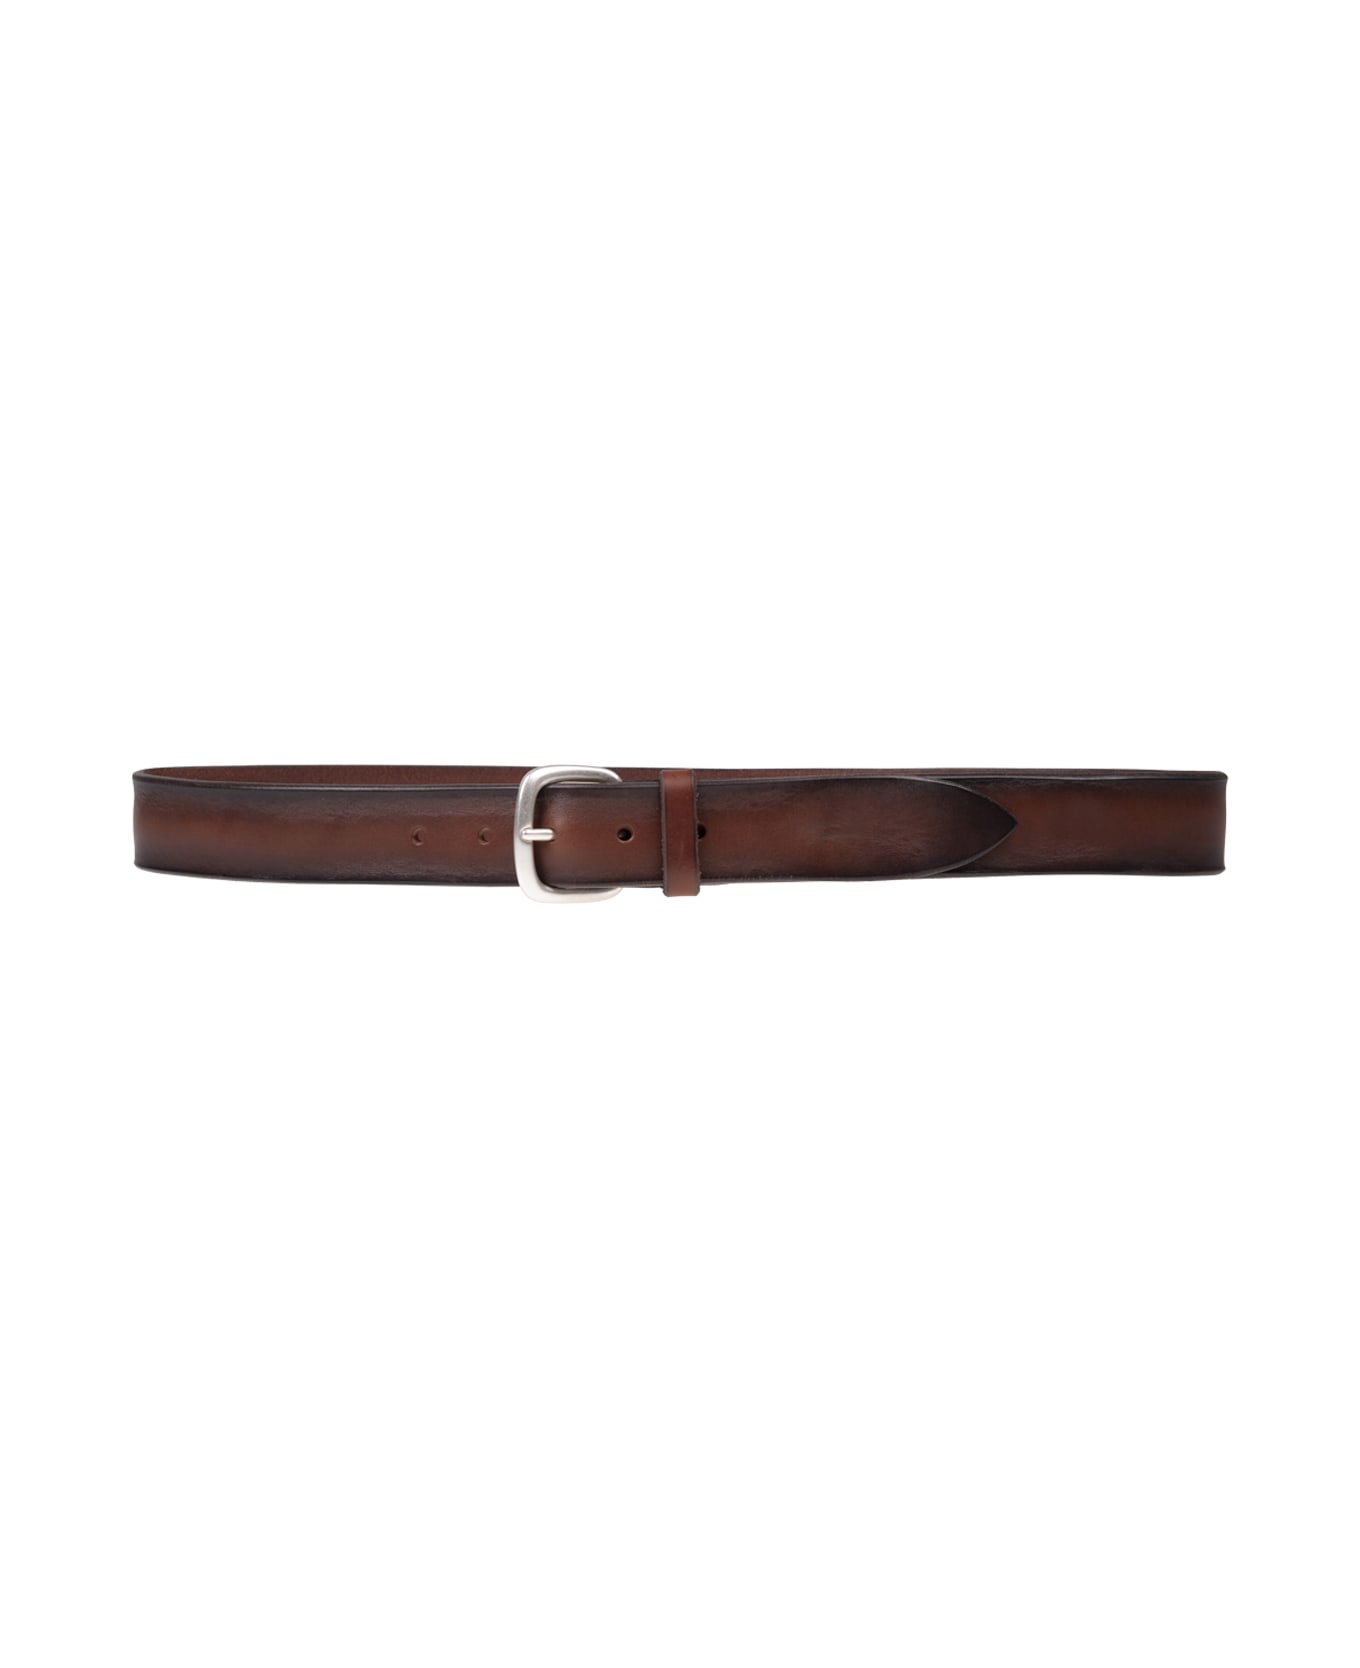 Orciani Bull Soft Belt In Brown Leather - Brown